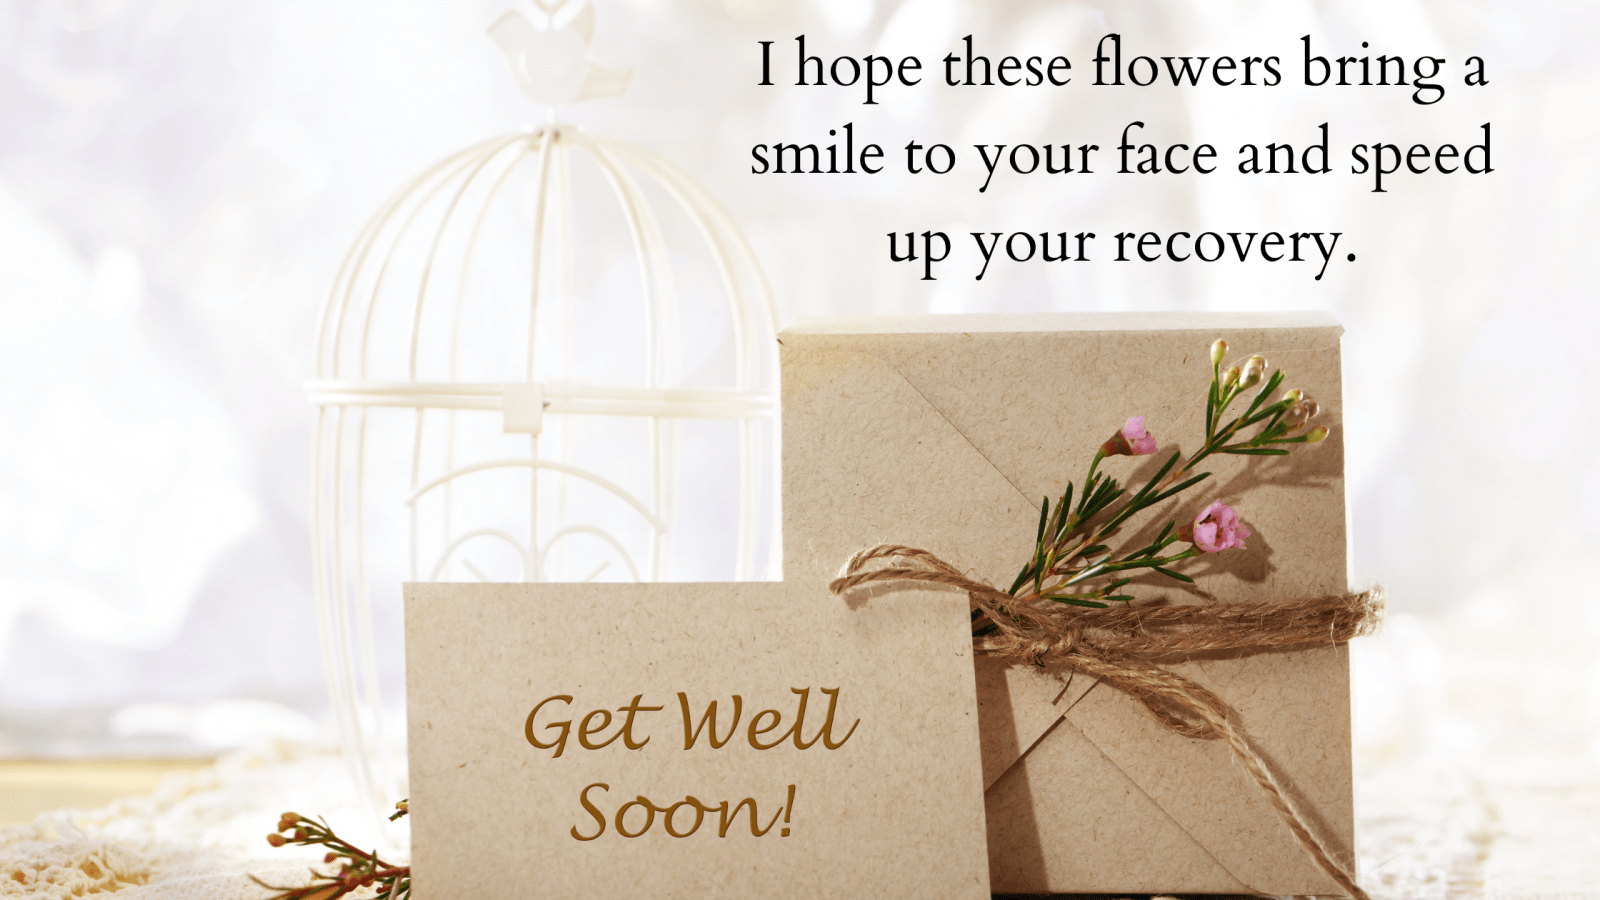 get well soon wishes